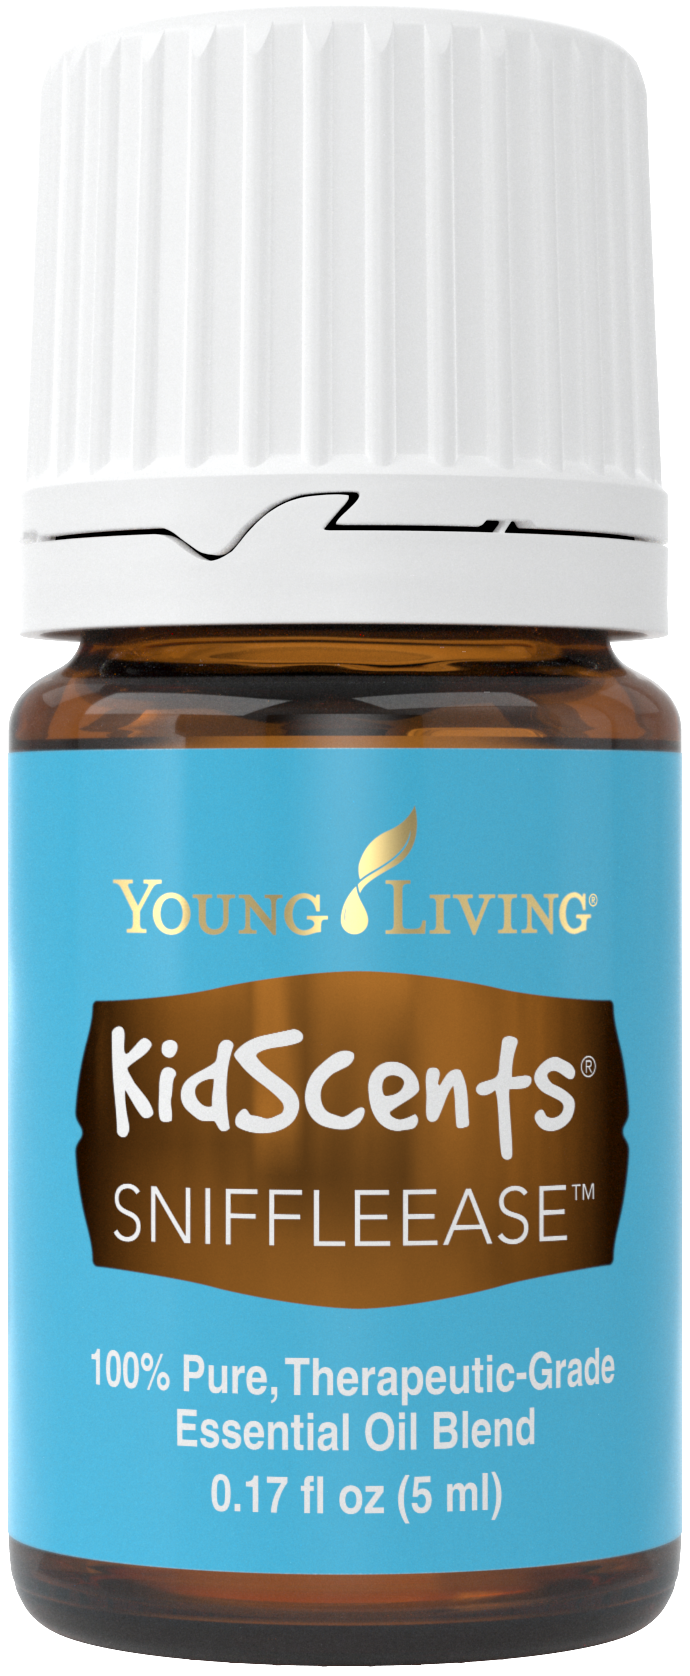 KidScents SniffleEase essential oil blend | Young Living